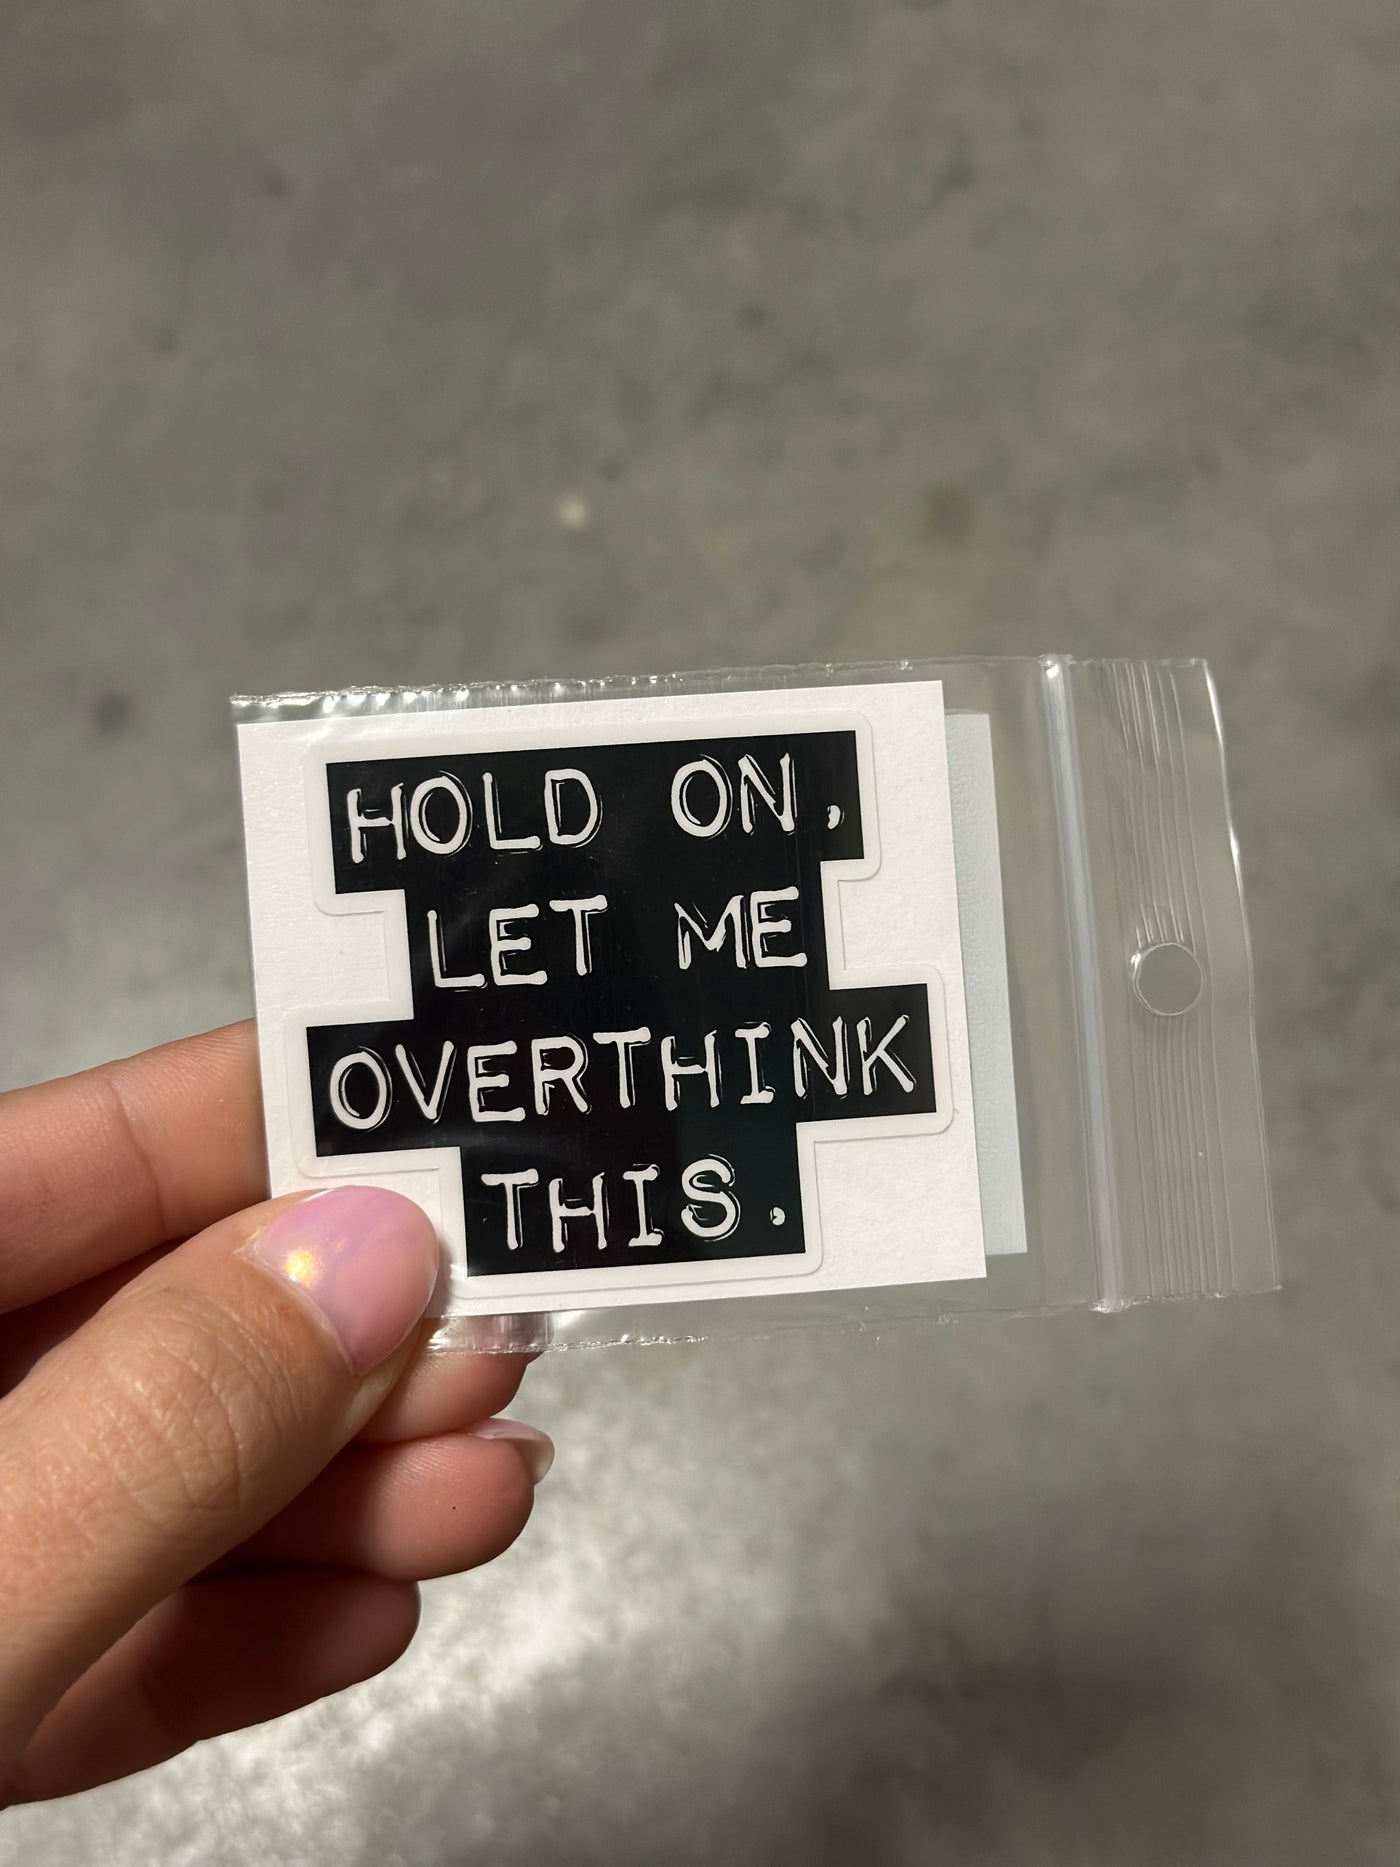 Hold on, Let me overthink this sticker